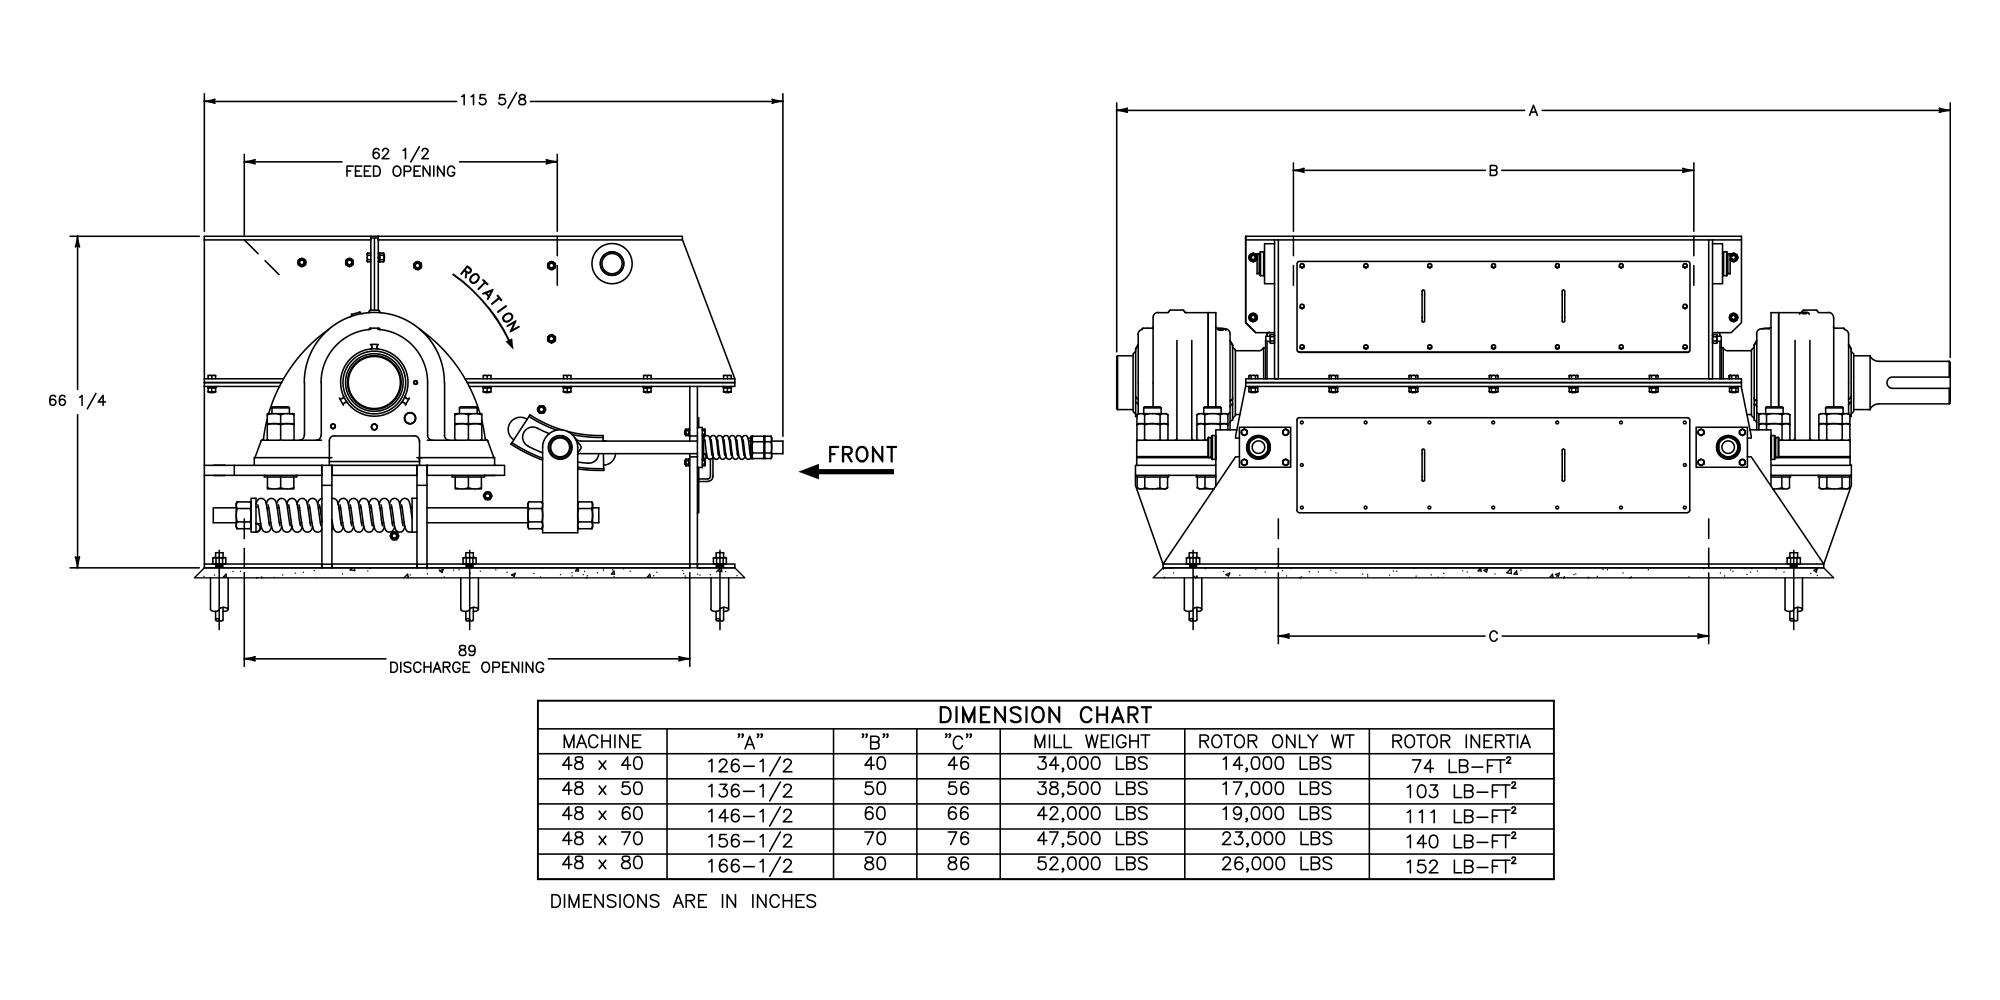 Dimensions of the Roller Crusher Diagram - Williams Patent Crusher